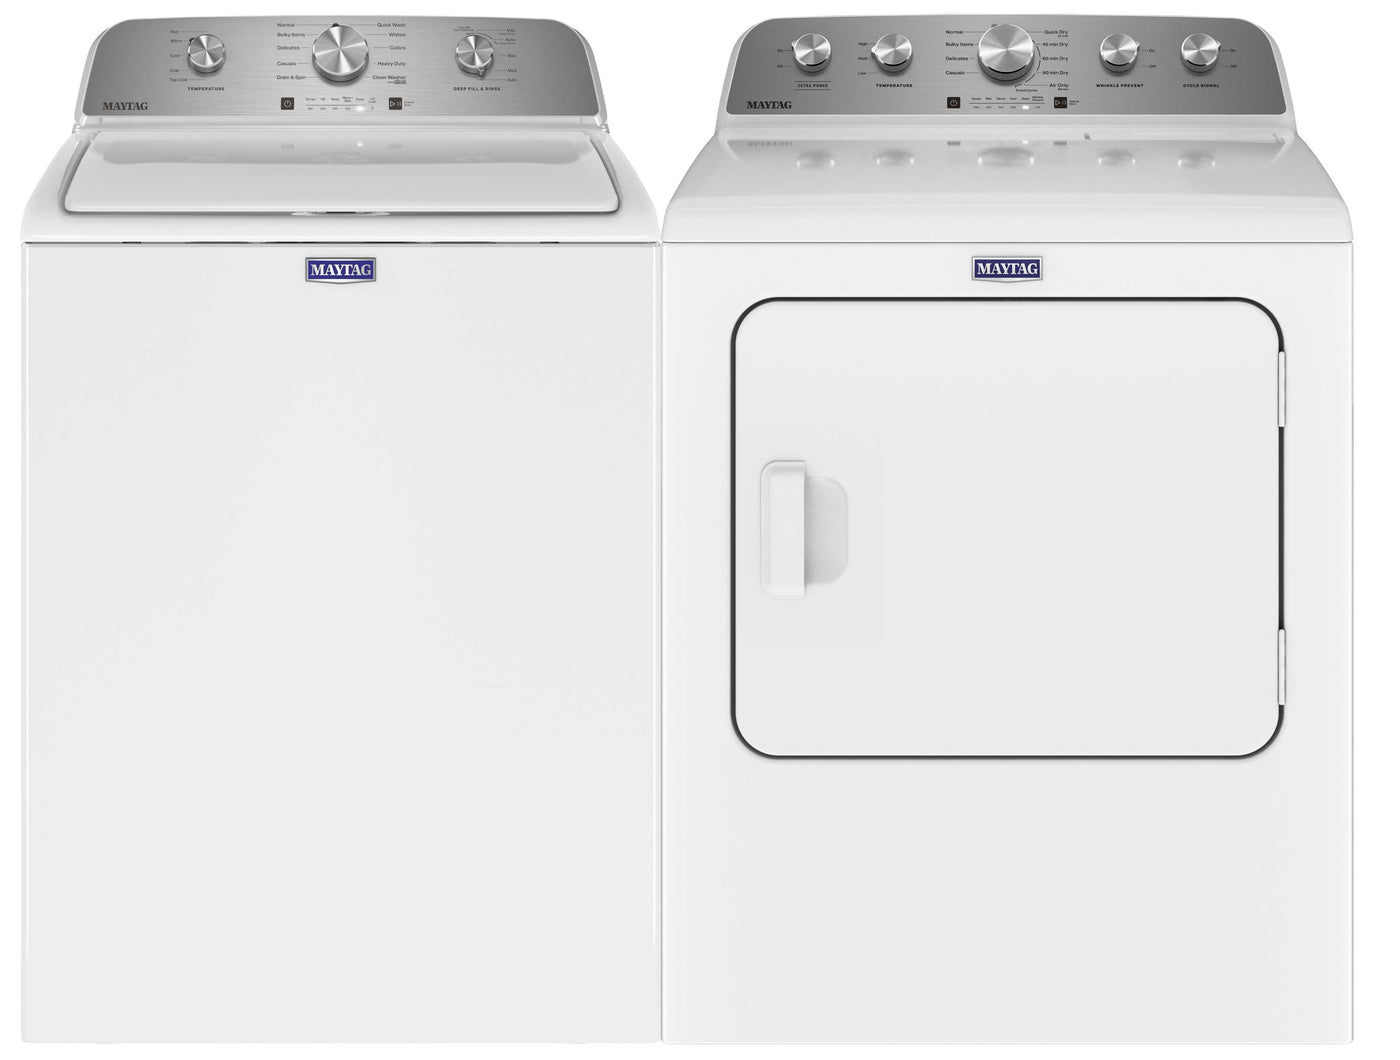 Maytag White Top-Load Washer (5.2 cu. ft.) & Electric Dryer with Extra Power (7.0 cu. ft.) - MVW4505MW/YMED5030MW